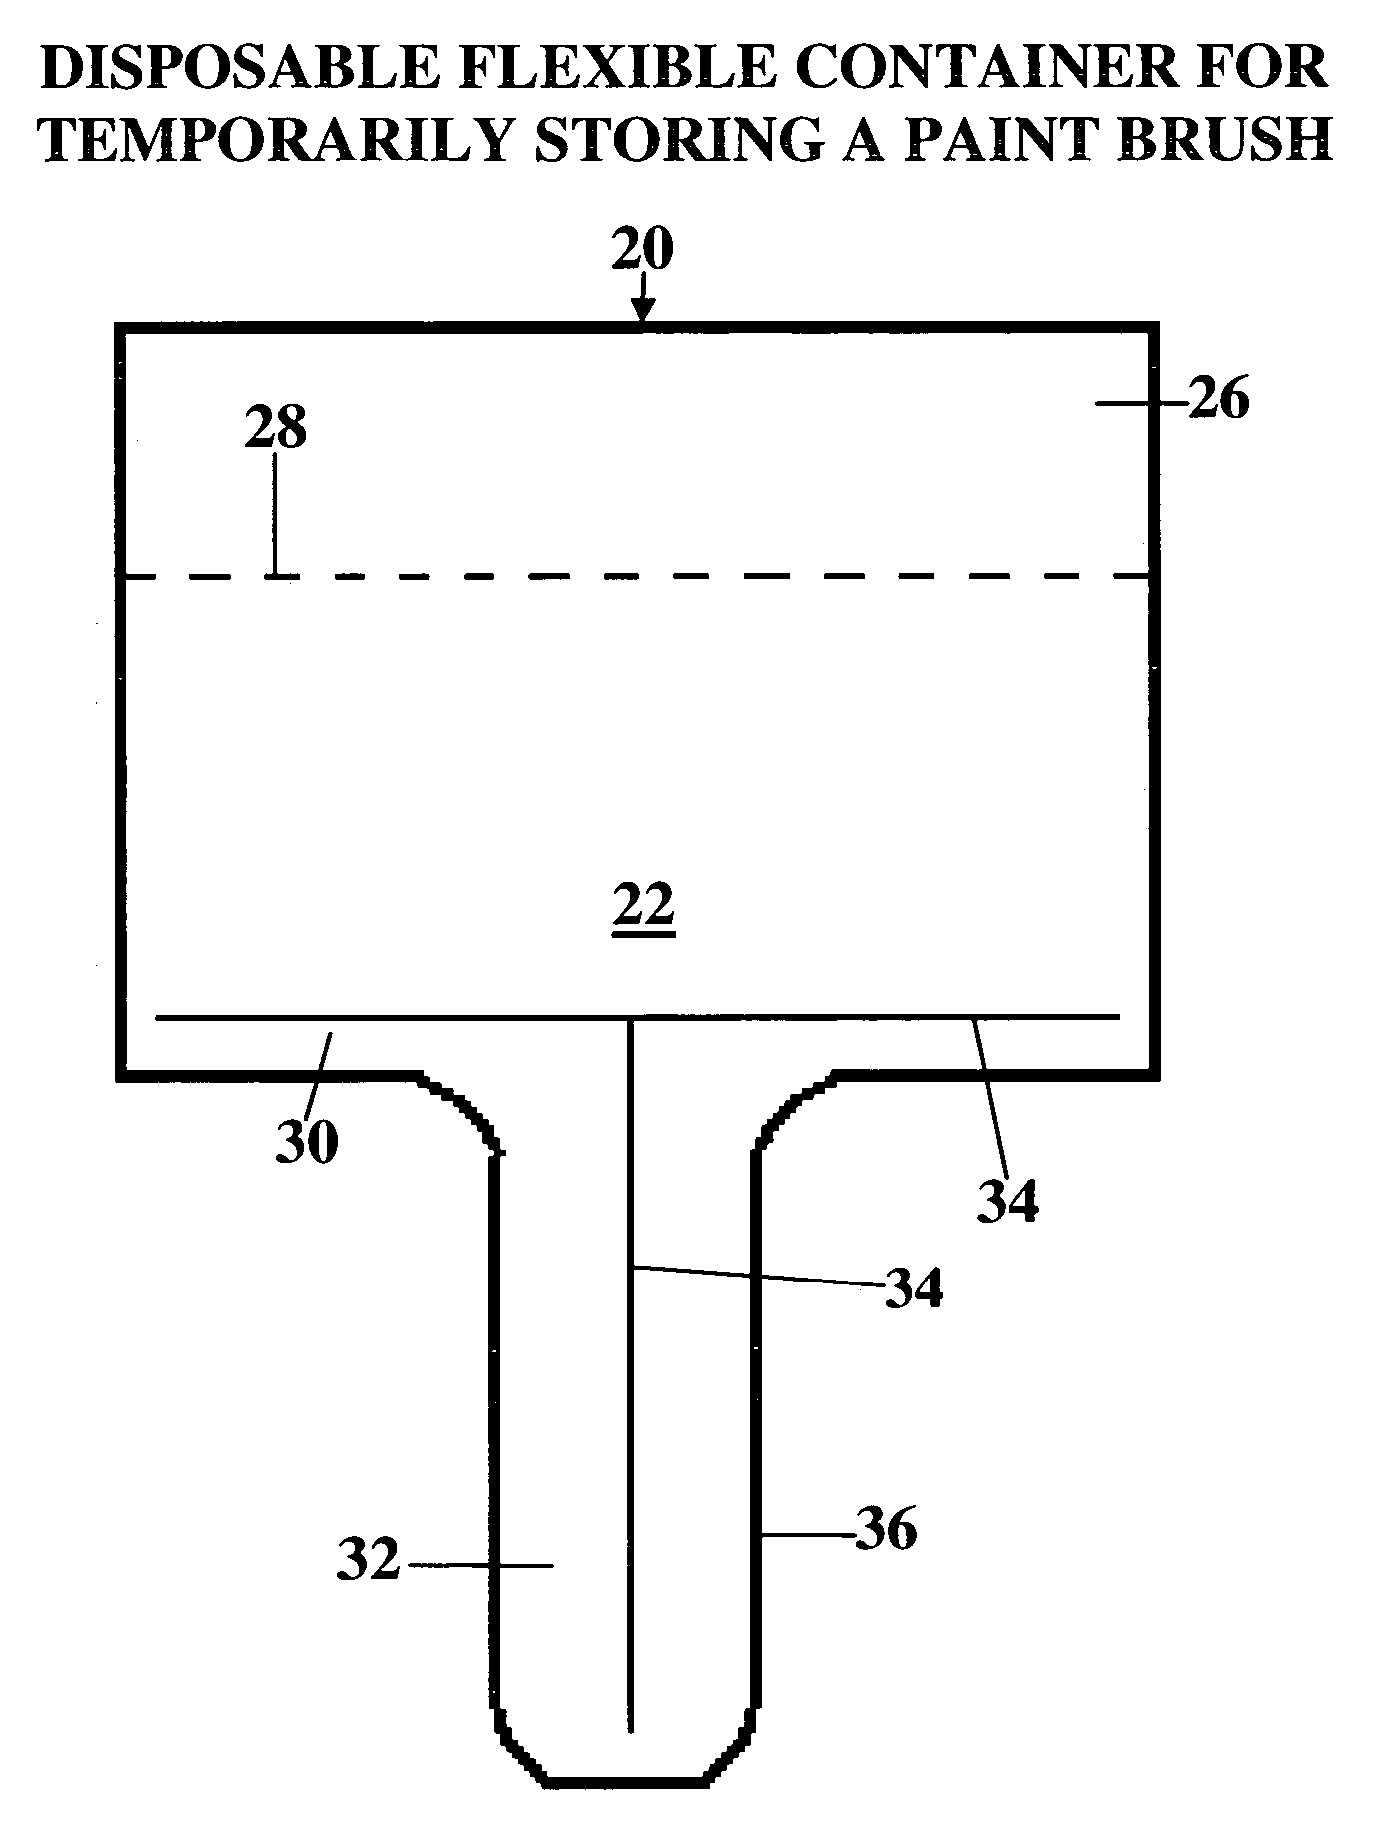 Disposable flexible container for temporarily storing a paint brush